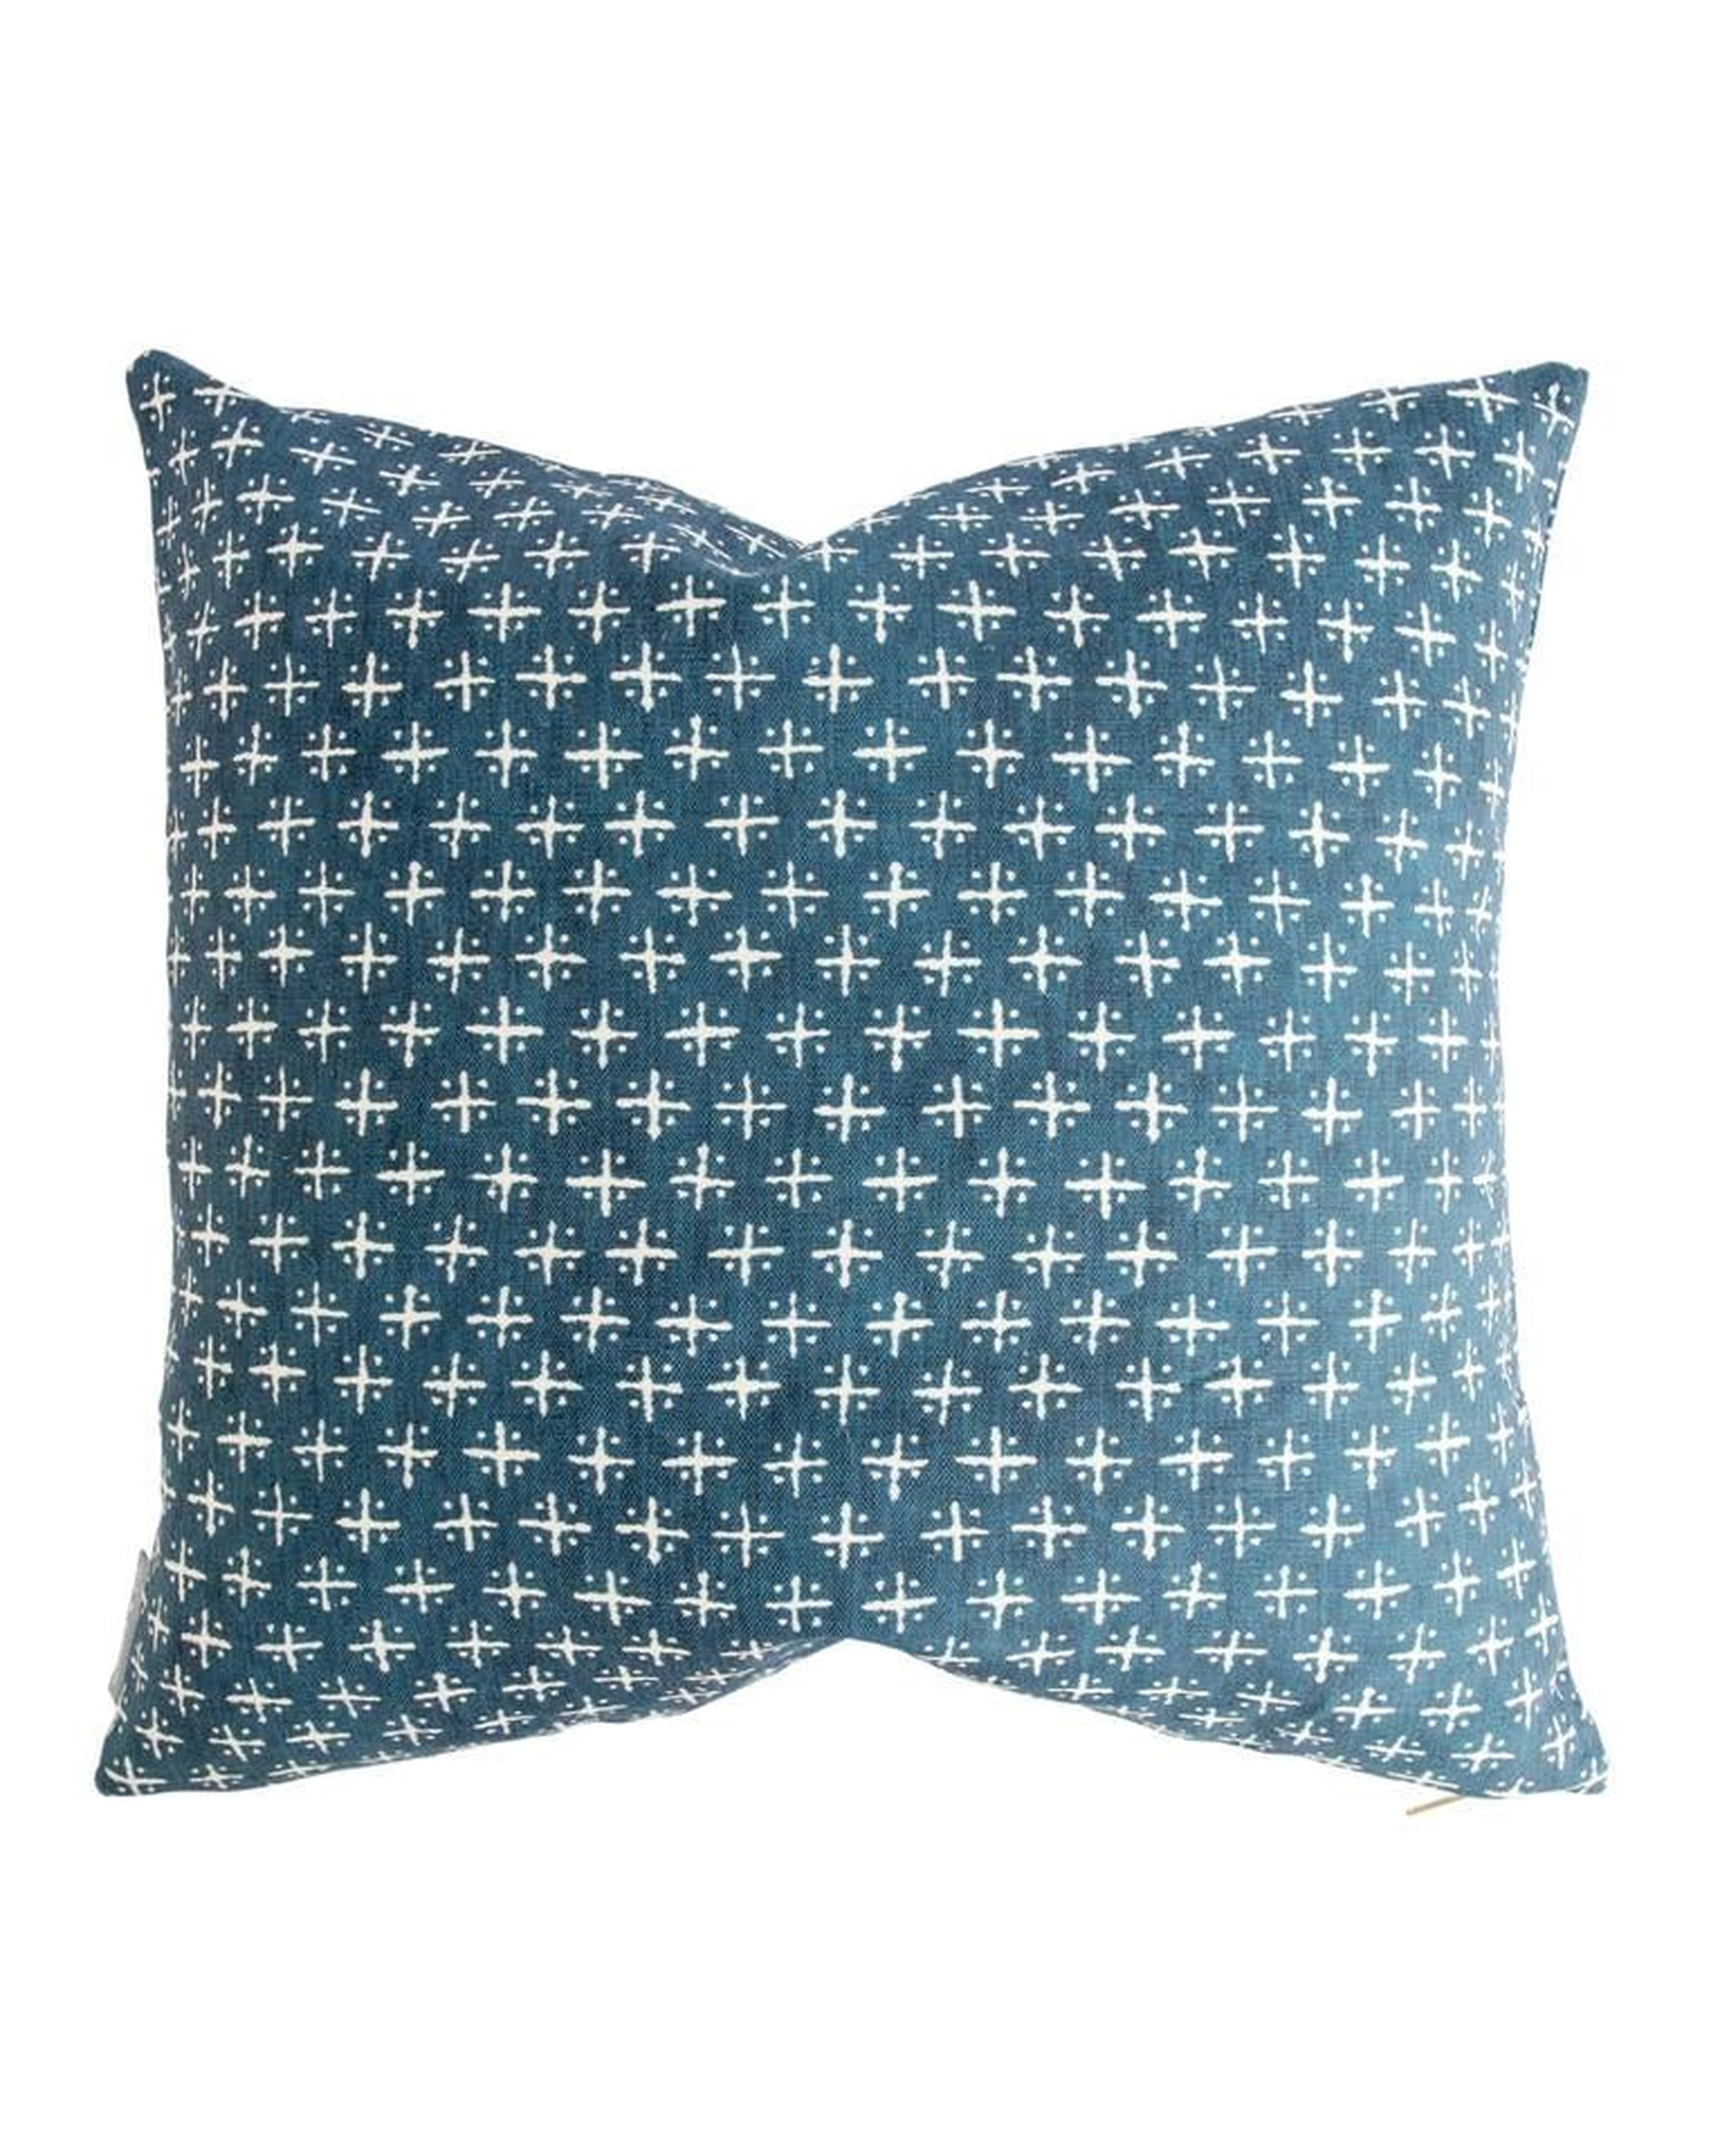 NEWPORT CROSS PILLOW WITHOUT INSERT, 24" x 24" - McGee & Co.